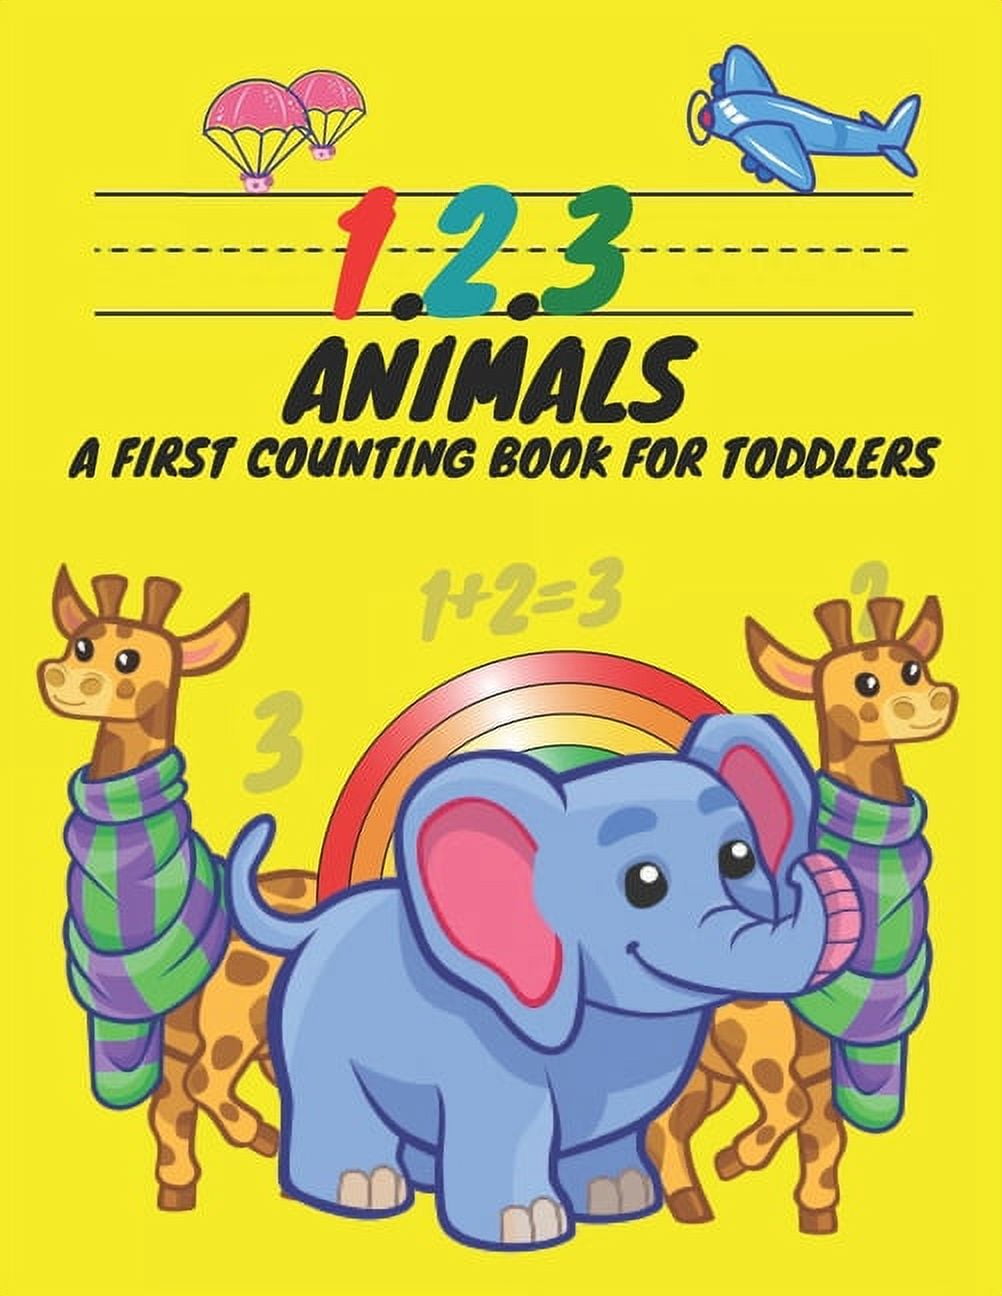 123 Numbers - Count & Tracing